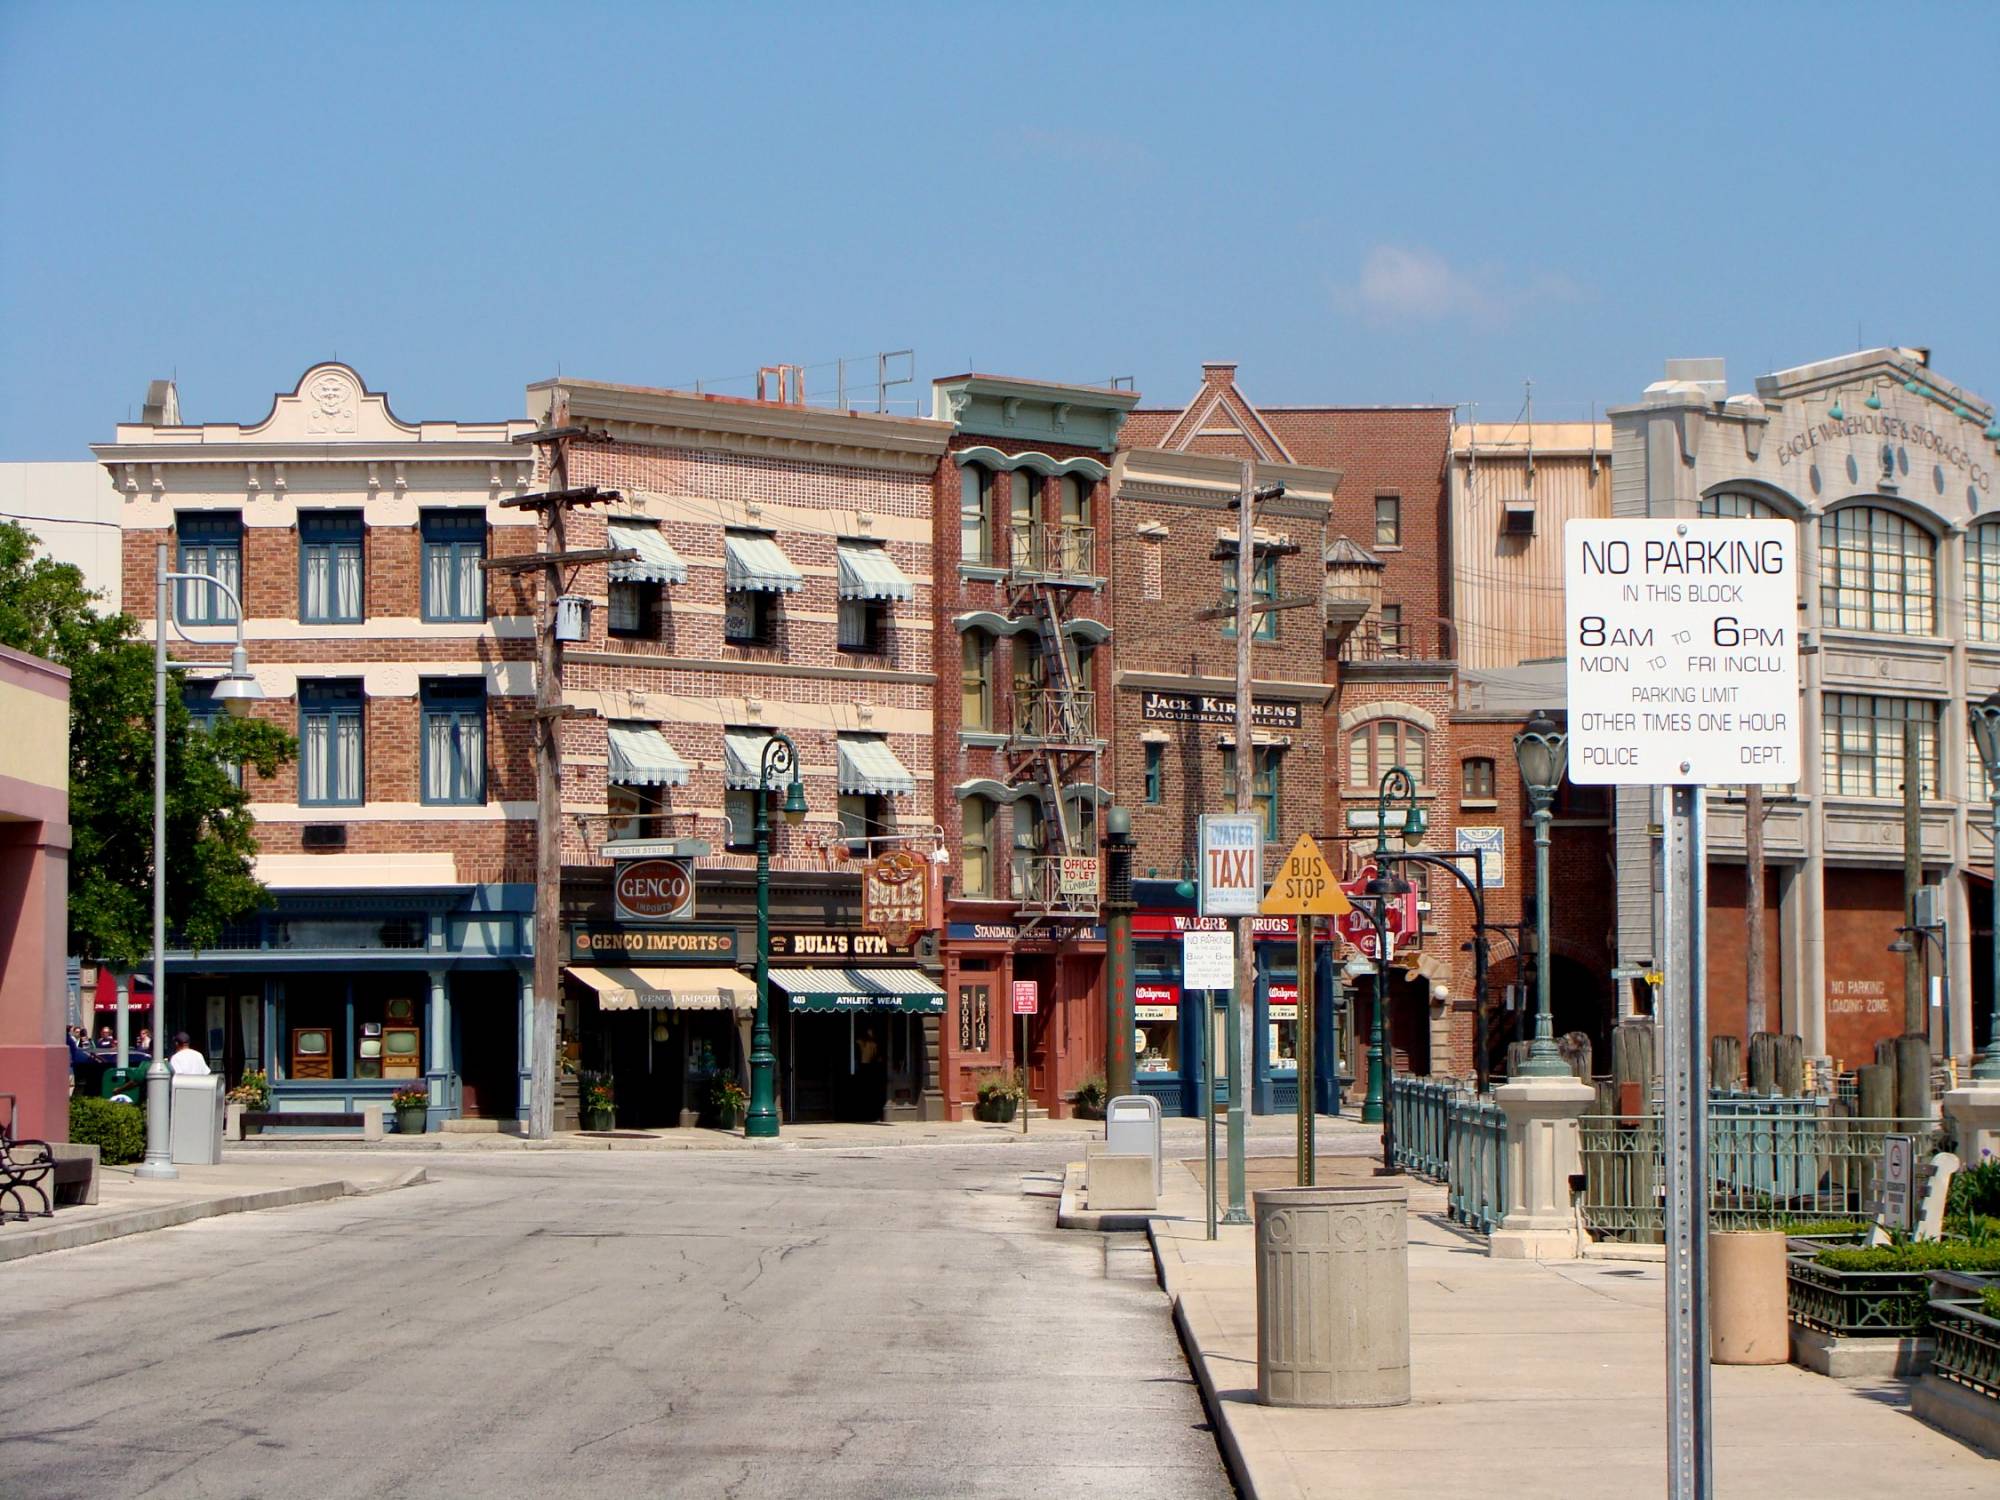 South Street (Chicago) area